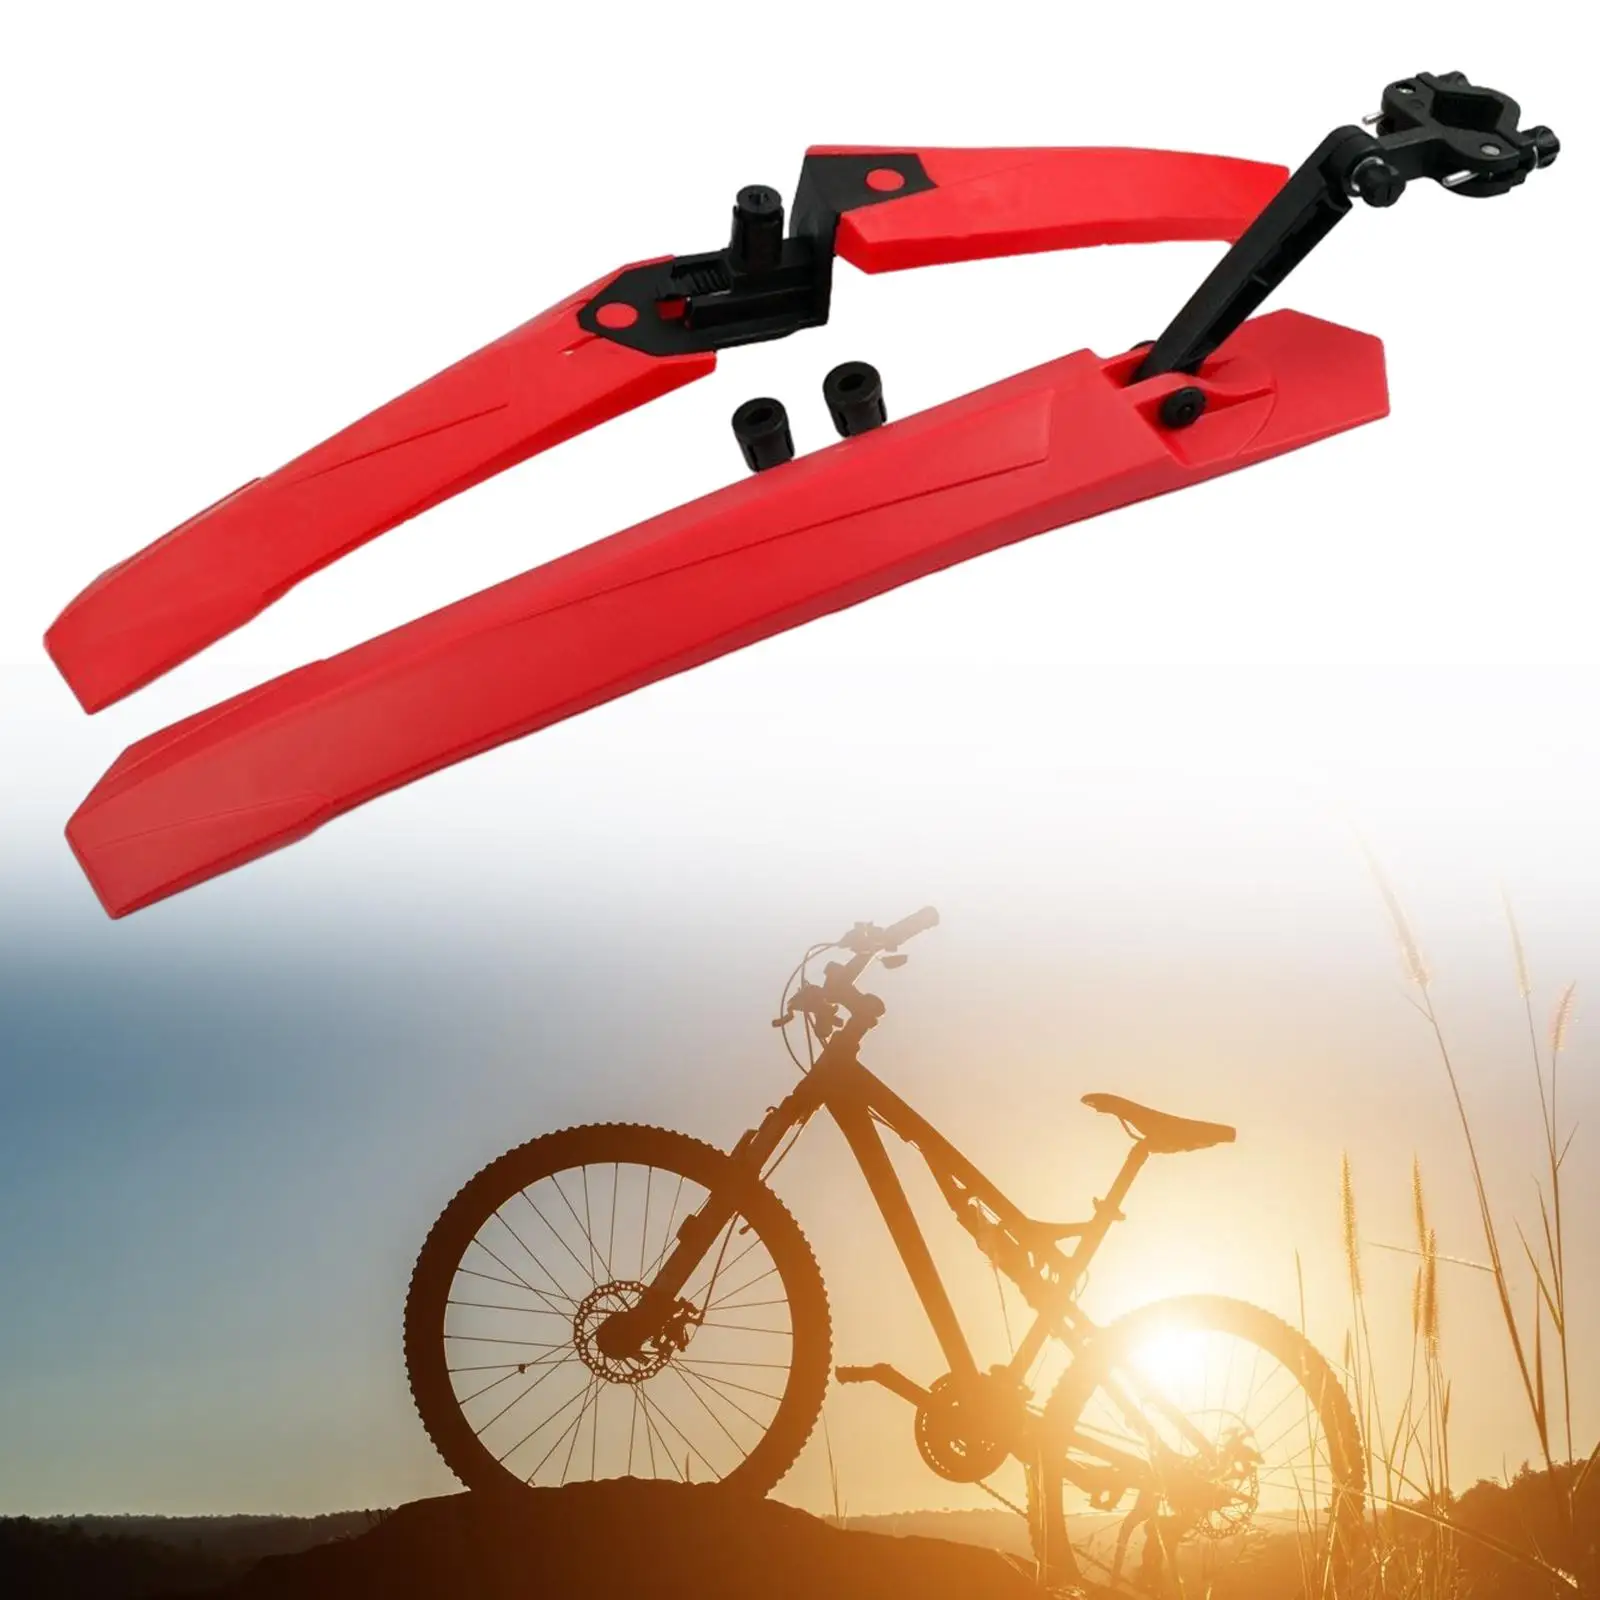 Bike Mudguard Front Rear Set Wheel Protection Easy to Install Portable Bicycle Mud Guard for Riding Cycling Outdoor Sports Accs